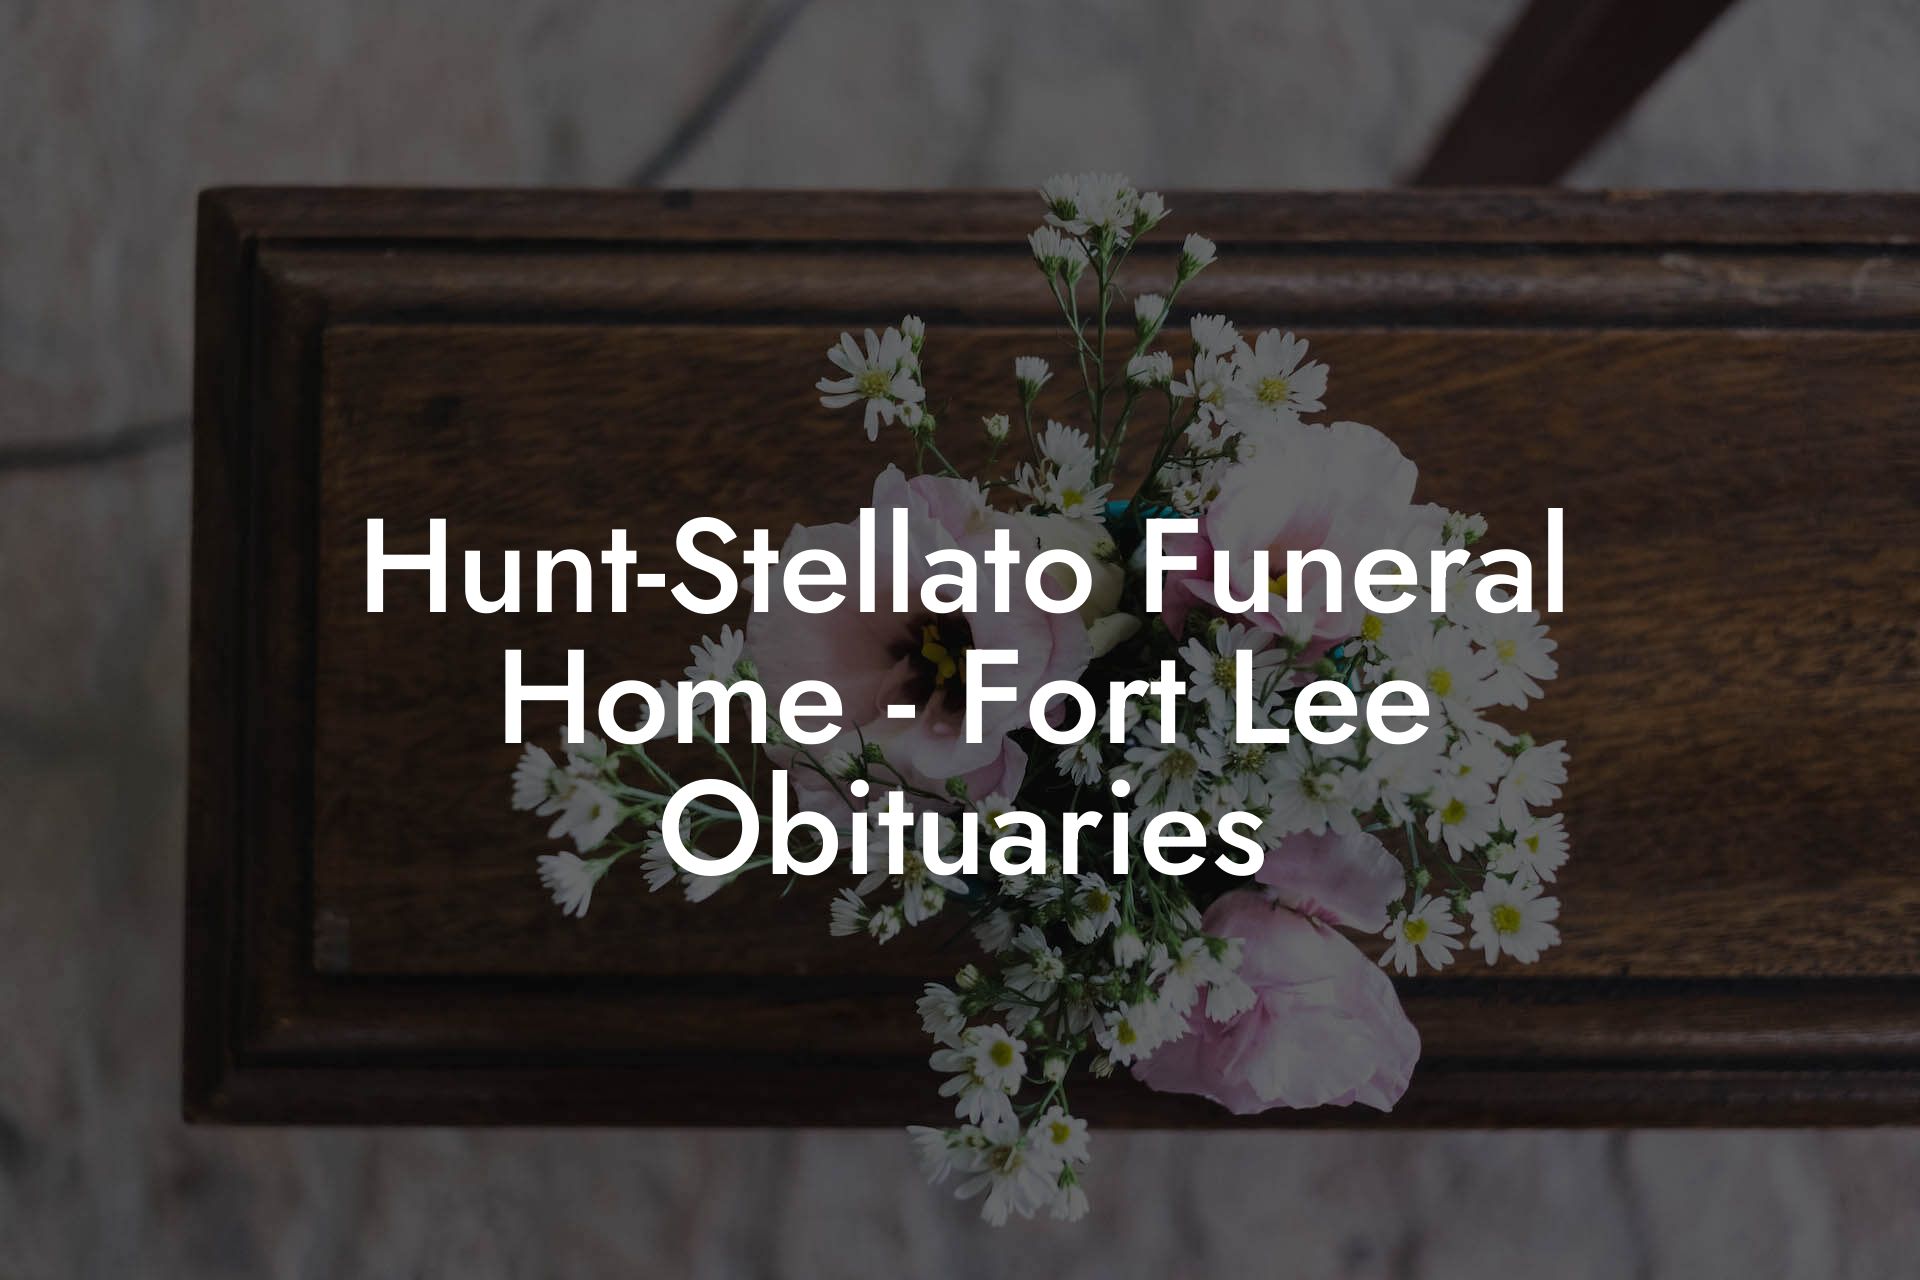 Hunt-Stellato Funeral Home - Fort Lee Obituaries